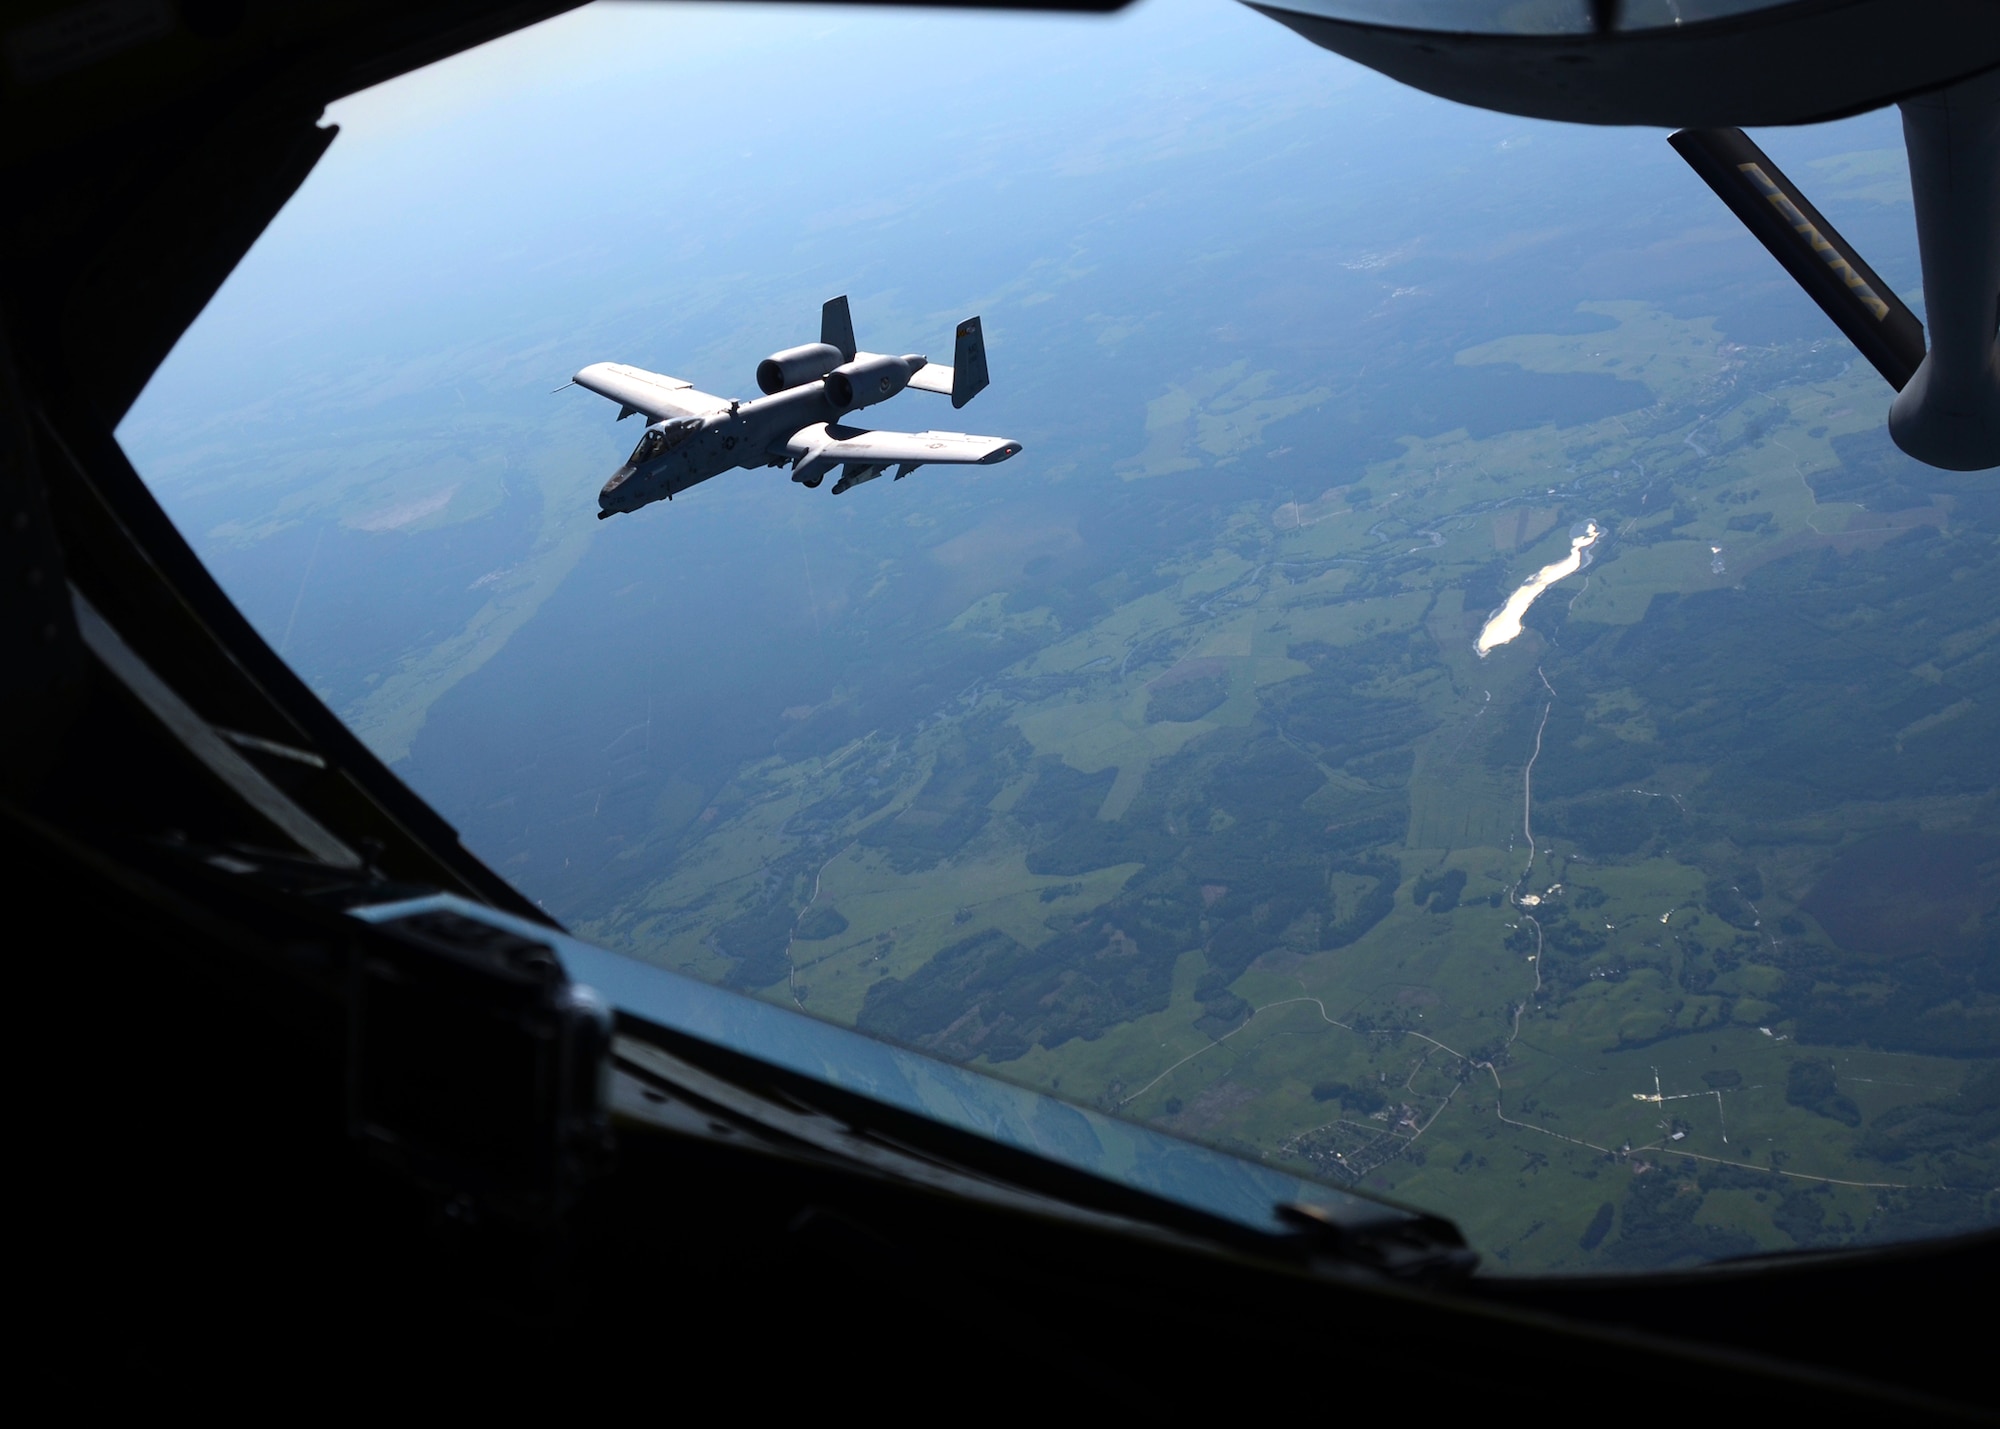 An A-10C Thunderbolt II assigned to the 104th Fighter Squadron flies near a KC-135 Stratotanker at the start of Saber Strike after departing from Amari Air Base, Estonia on June 3, 2013. The KC-1345 provided aerial refueling to A-10C s assigned to the 104th Fighter Squadron during the exercise with the Estonian Air Force and Maryland Air National Guard. Saber Strike 2013 is a multinational exercise involving approximately 2,000 personnel from 14 countries and is designed to improve NATO interoperability and strengthen the relationships between military forces of the U.S., Estonia and other participating nations. (U.S. Air National Guard photo by Staff Sgt. Benjamin Hughes)